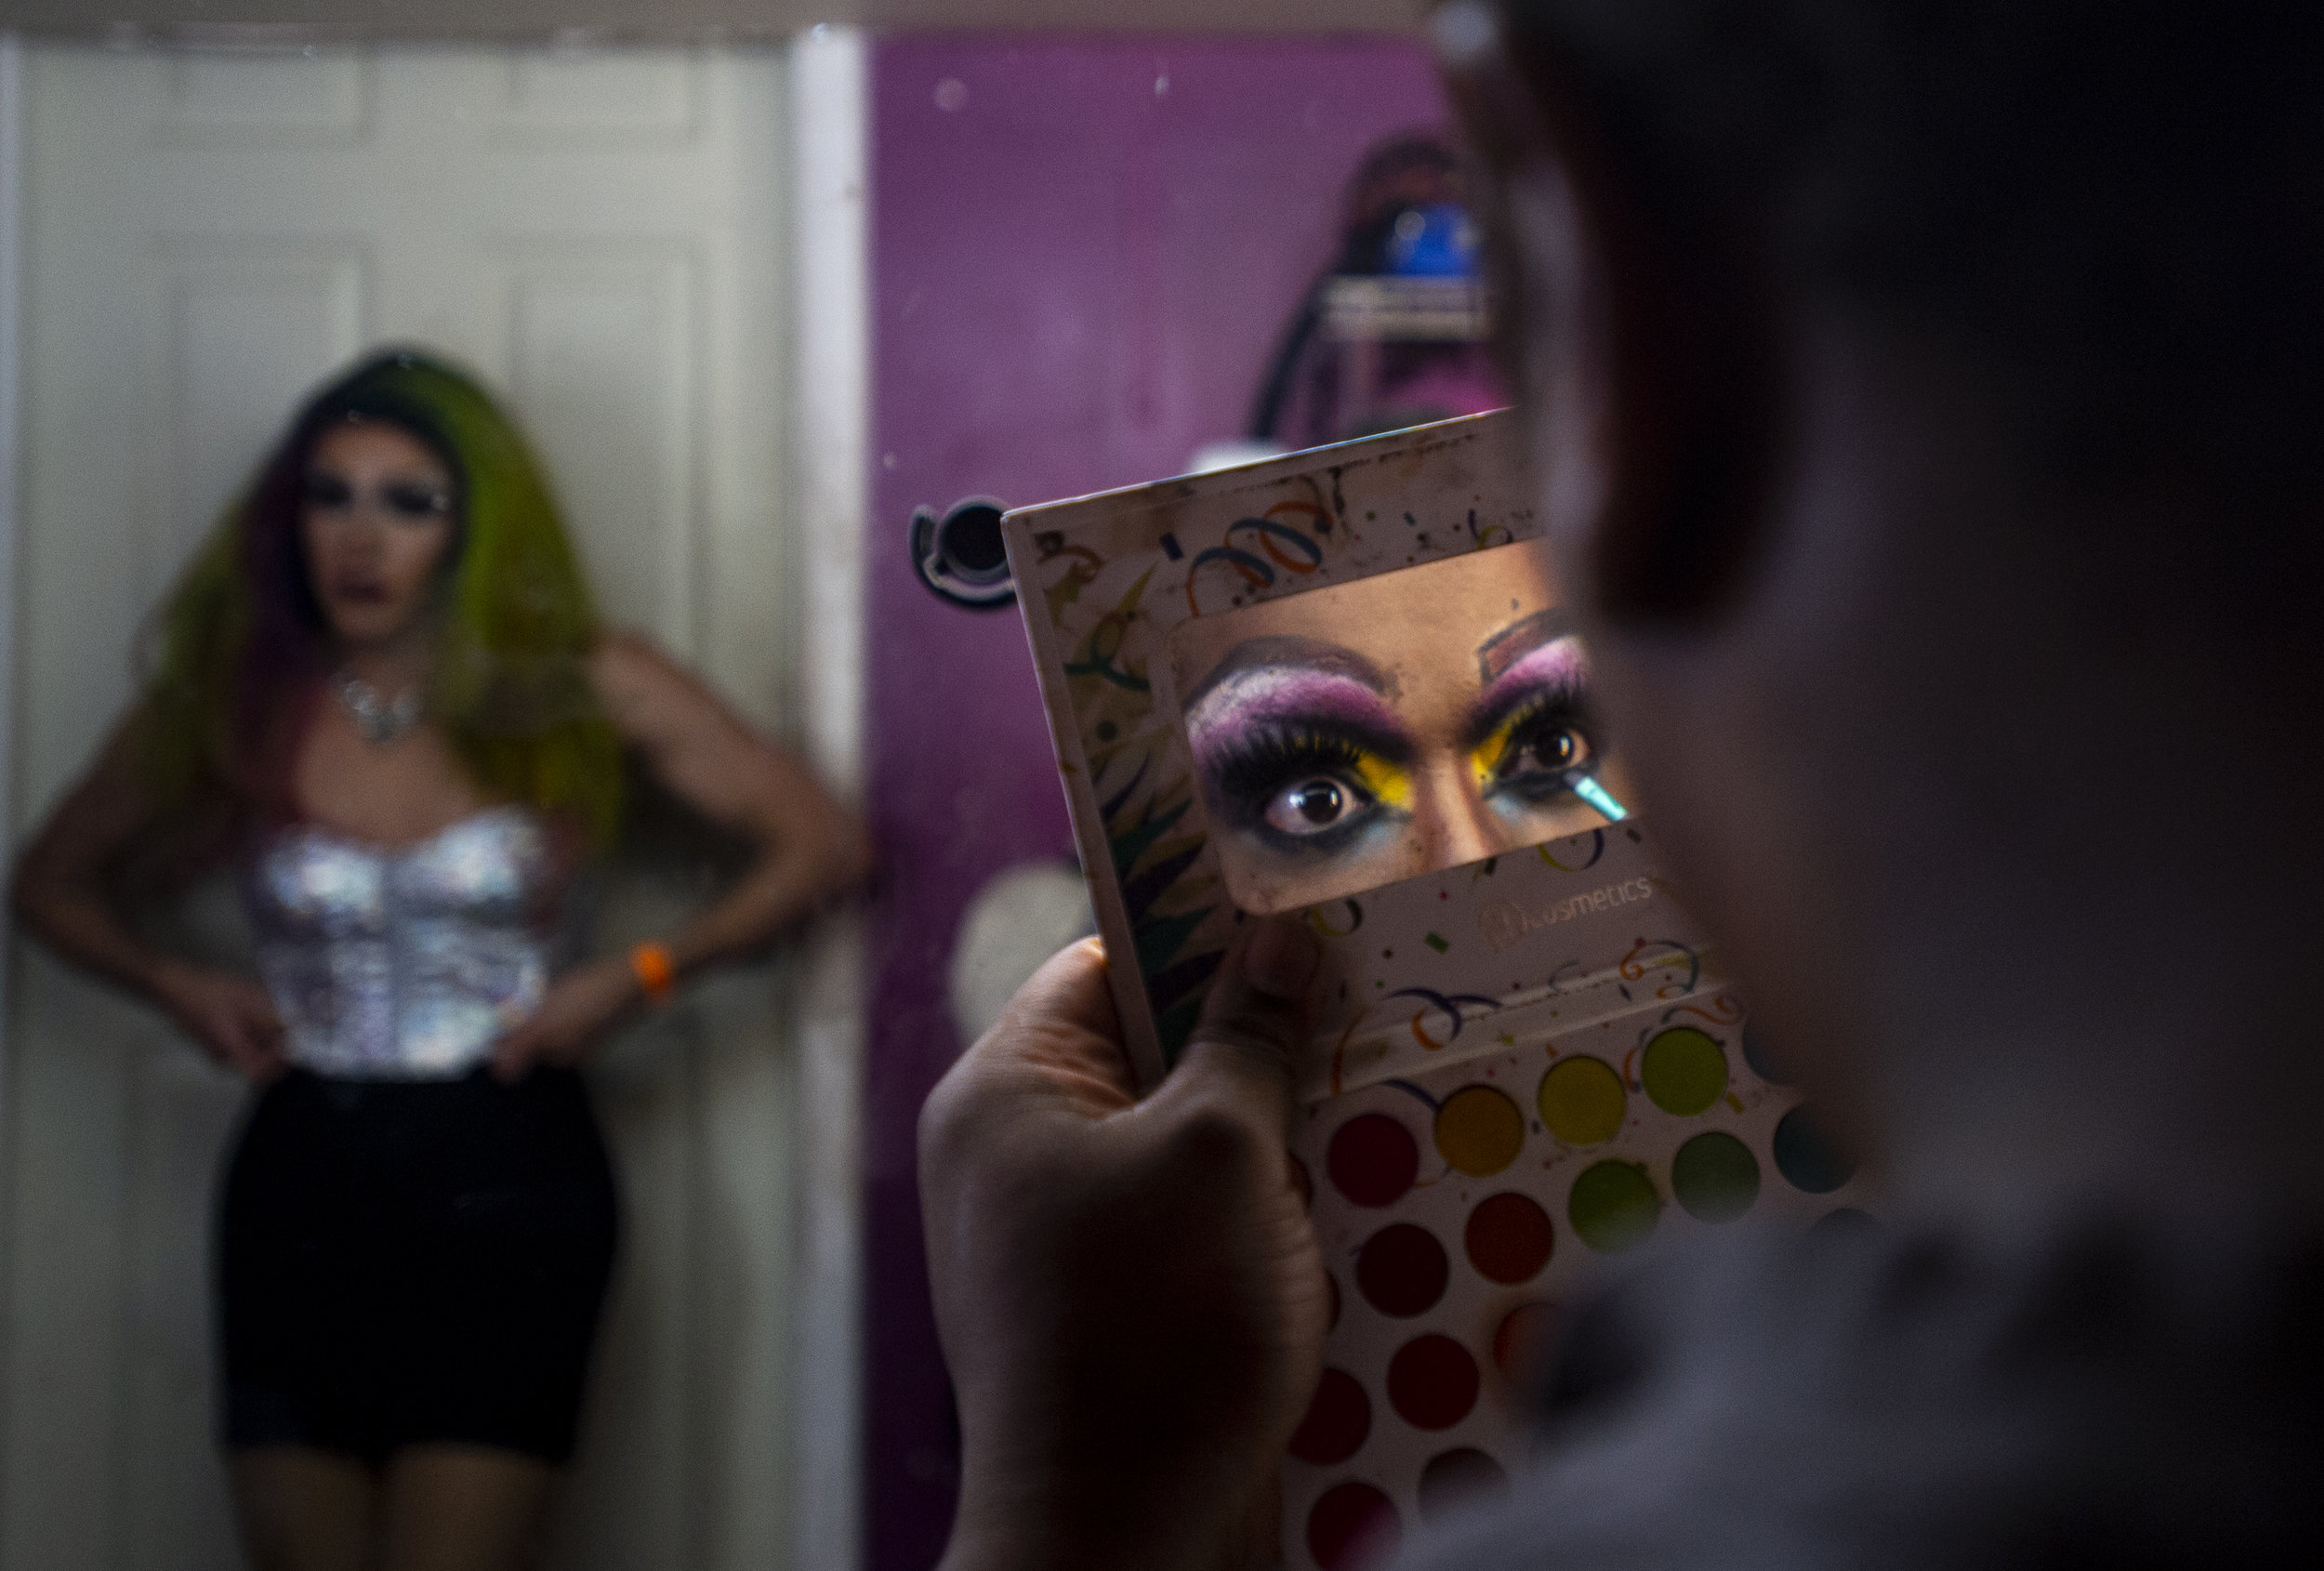  From left, Autumn Quinn and Porsha DeMarco-Douglas, performers, entertainers and drag queens at Club Q in Colorado Springs, Colo., prepare for a show on an evening in early June, 2019.  